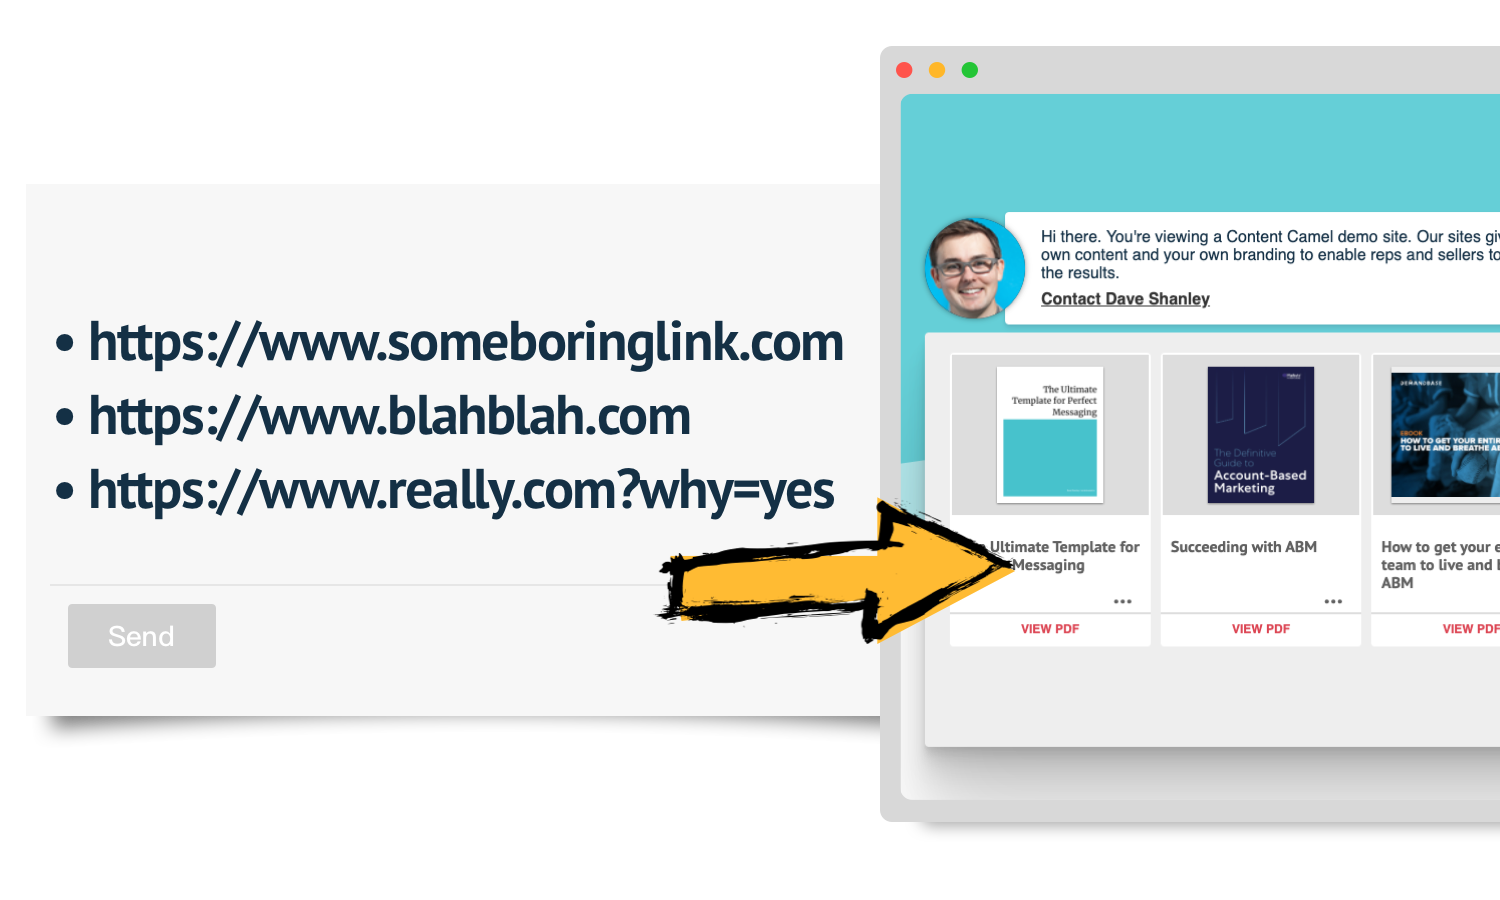 Change boring links into an engaging buyer experience